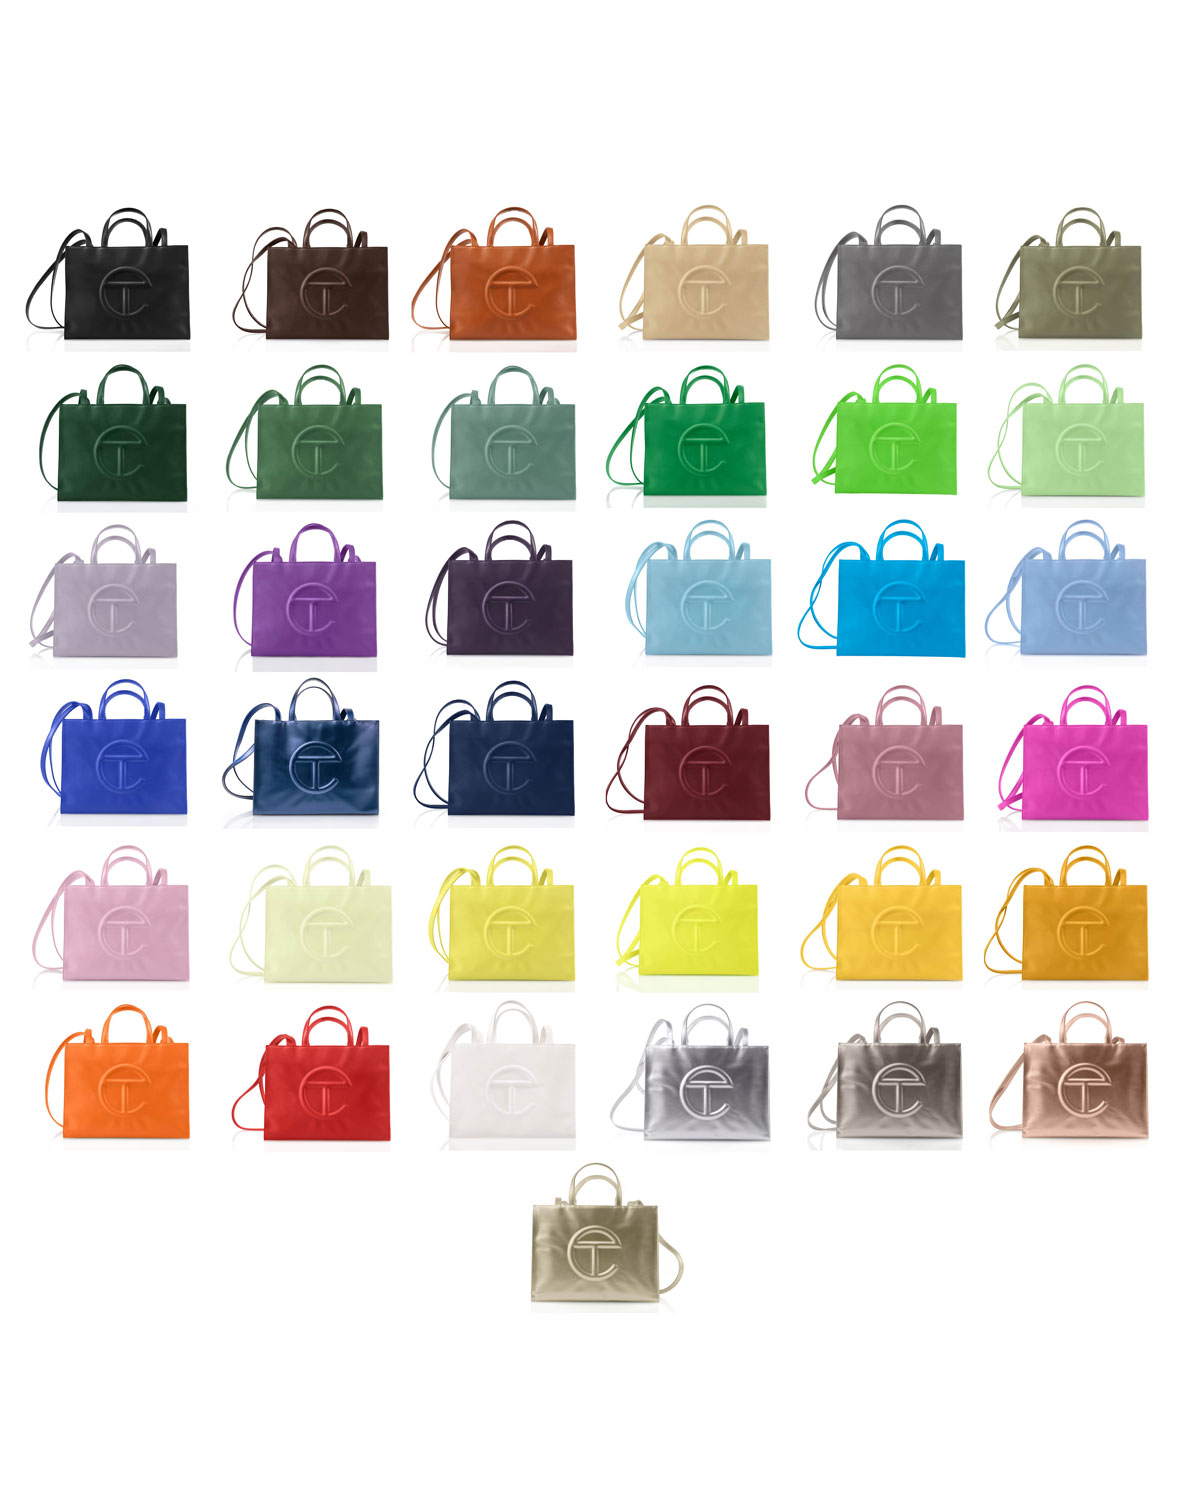 Editor's Pick: Telfar Released New Colorways For Its Popular Shopping Bag